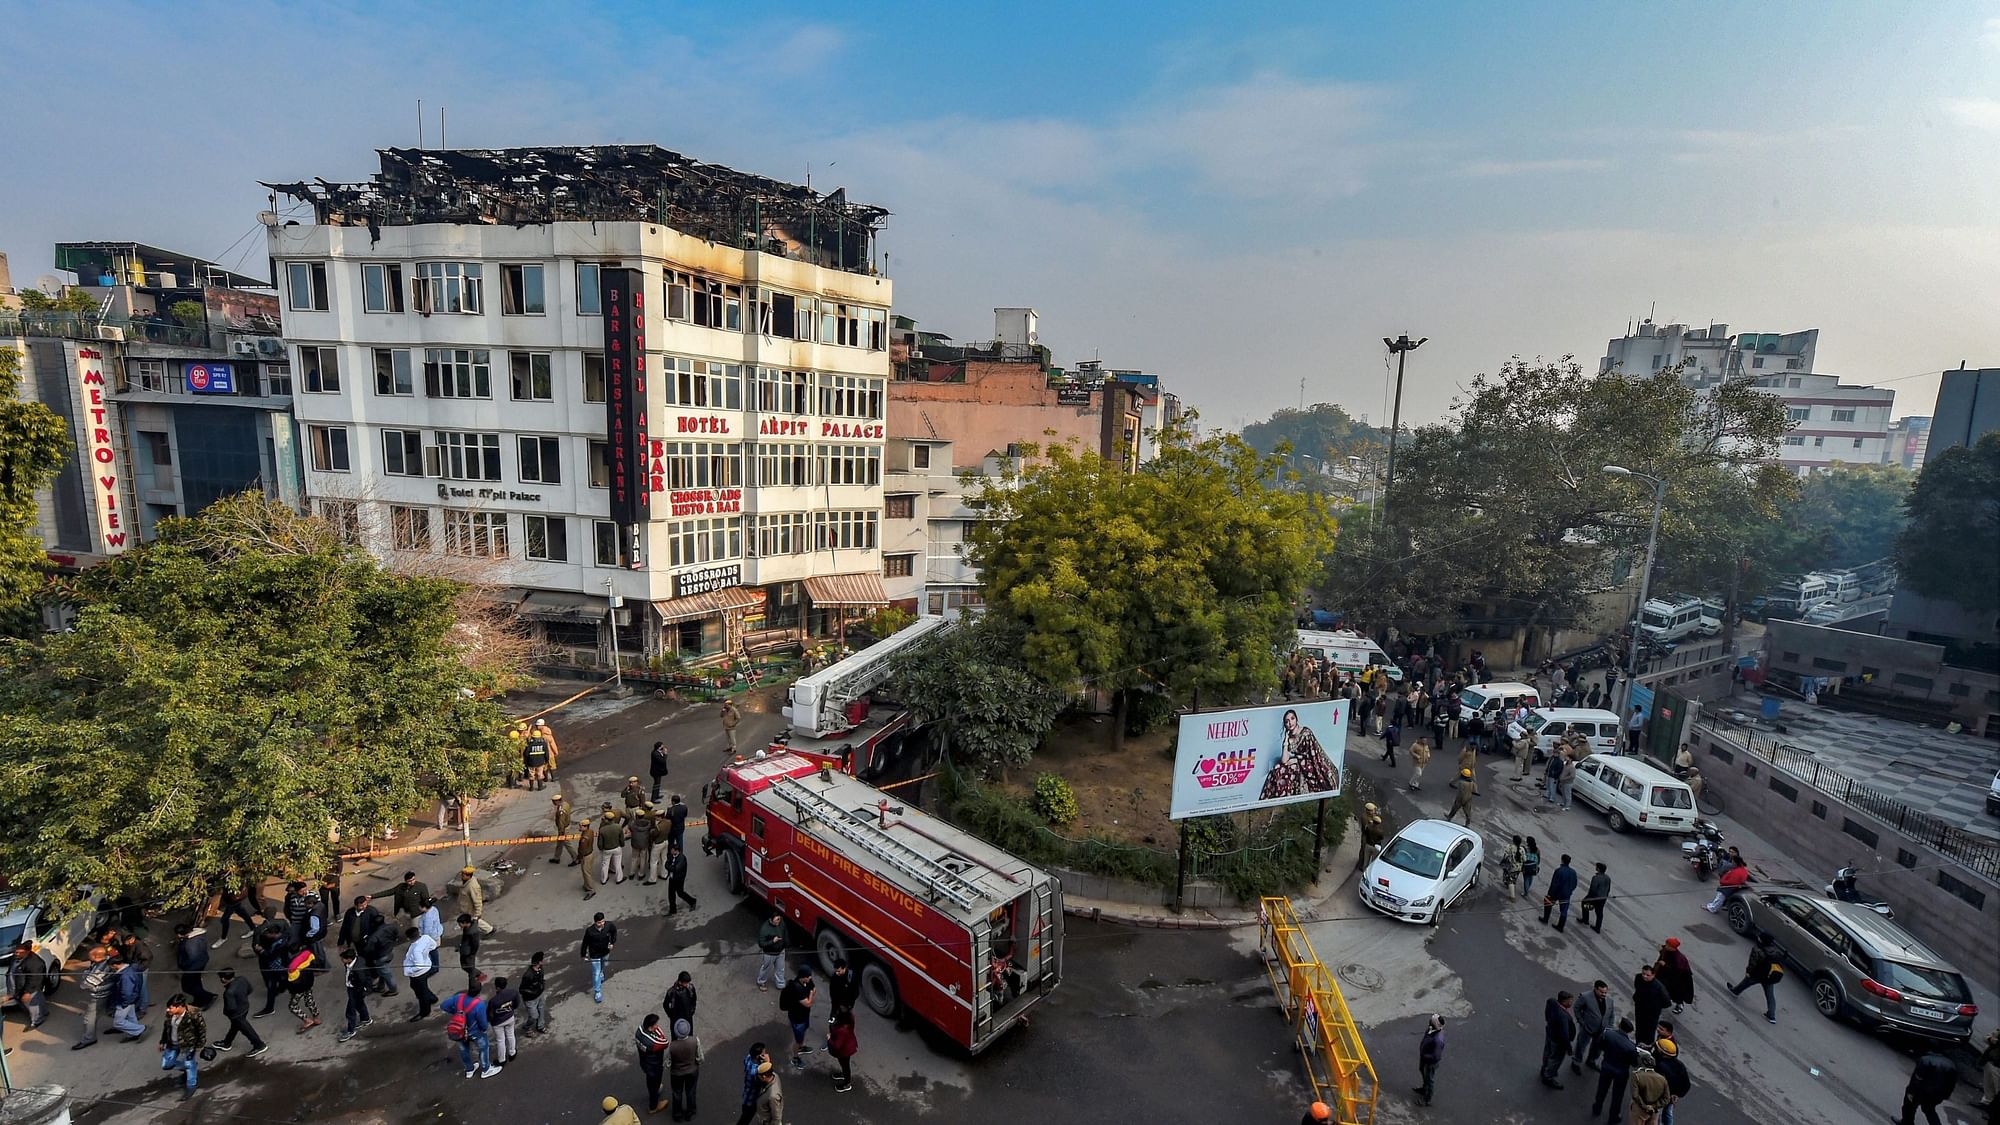 A fire broke out at a hotel in Delhi’s Karol Bagh area on Tuesday, 12 February, leaving at least 17 dead and five injured.